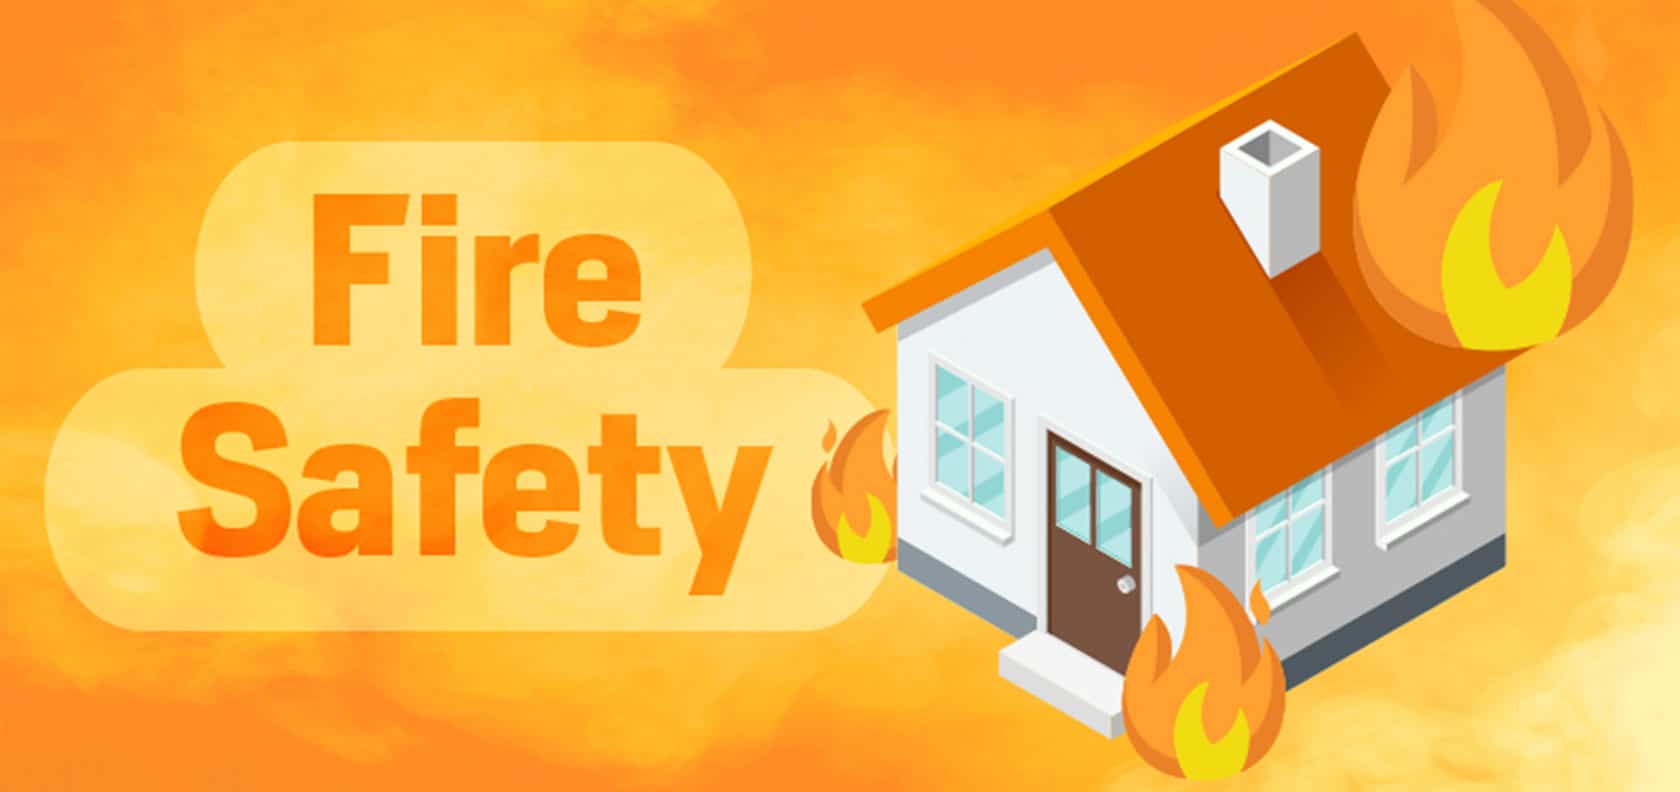 Illustration of a burning house with orange background to show data about fire in the home.